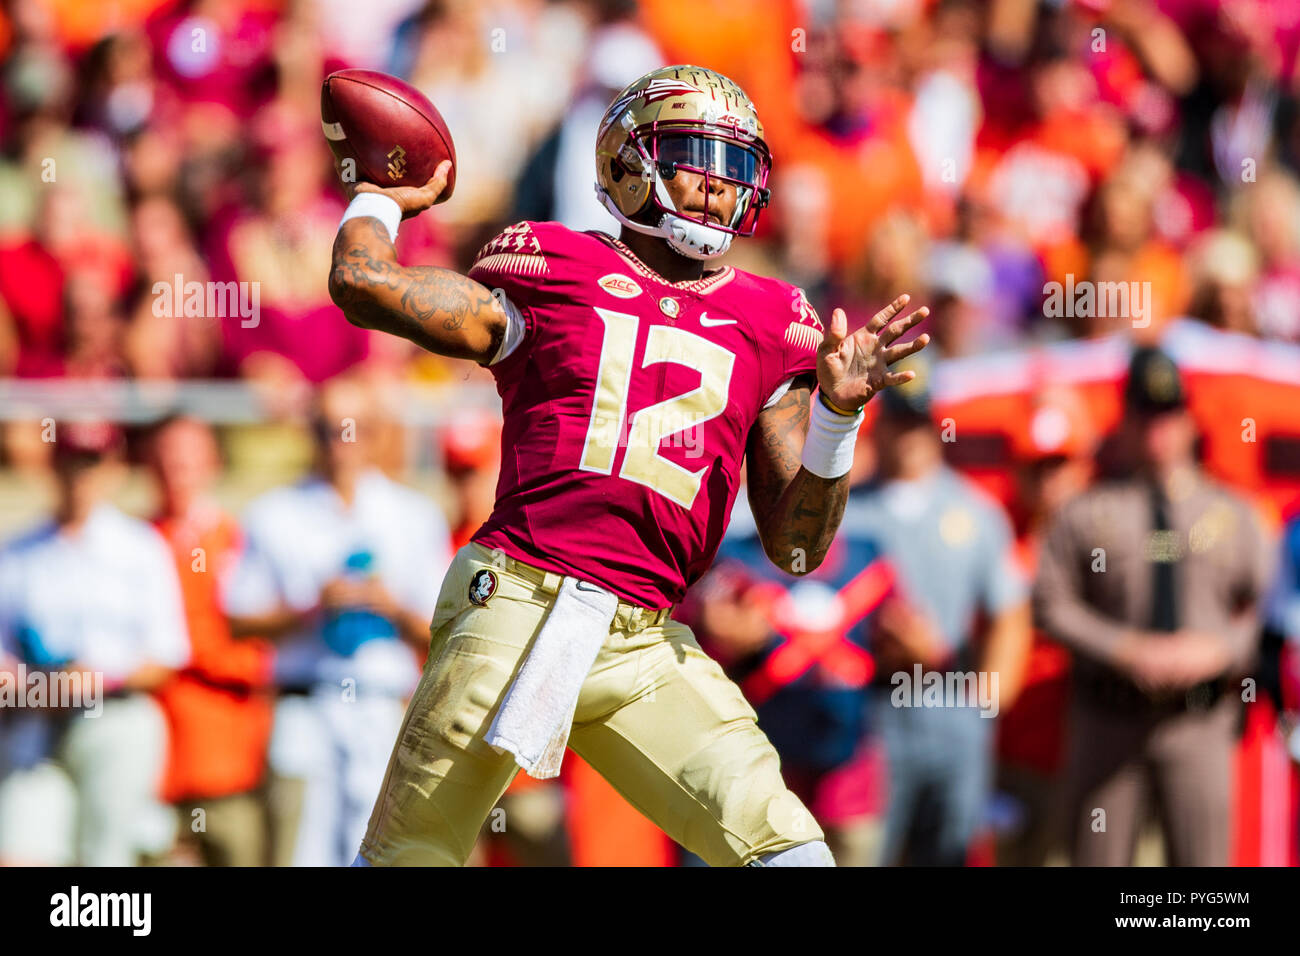 Florida State Seminoles quarterback Deondre Francois (12) during the NCAA college football game between Clemson and Florida State on Saturday October 27, 2018 at Doak Campbell Stadium in Tallahassee, FL. Jacob Kupferman/CSM Stock Photo